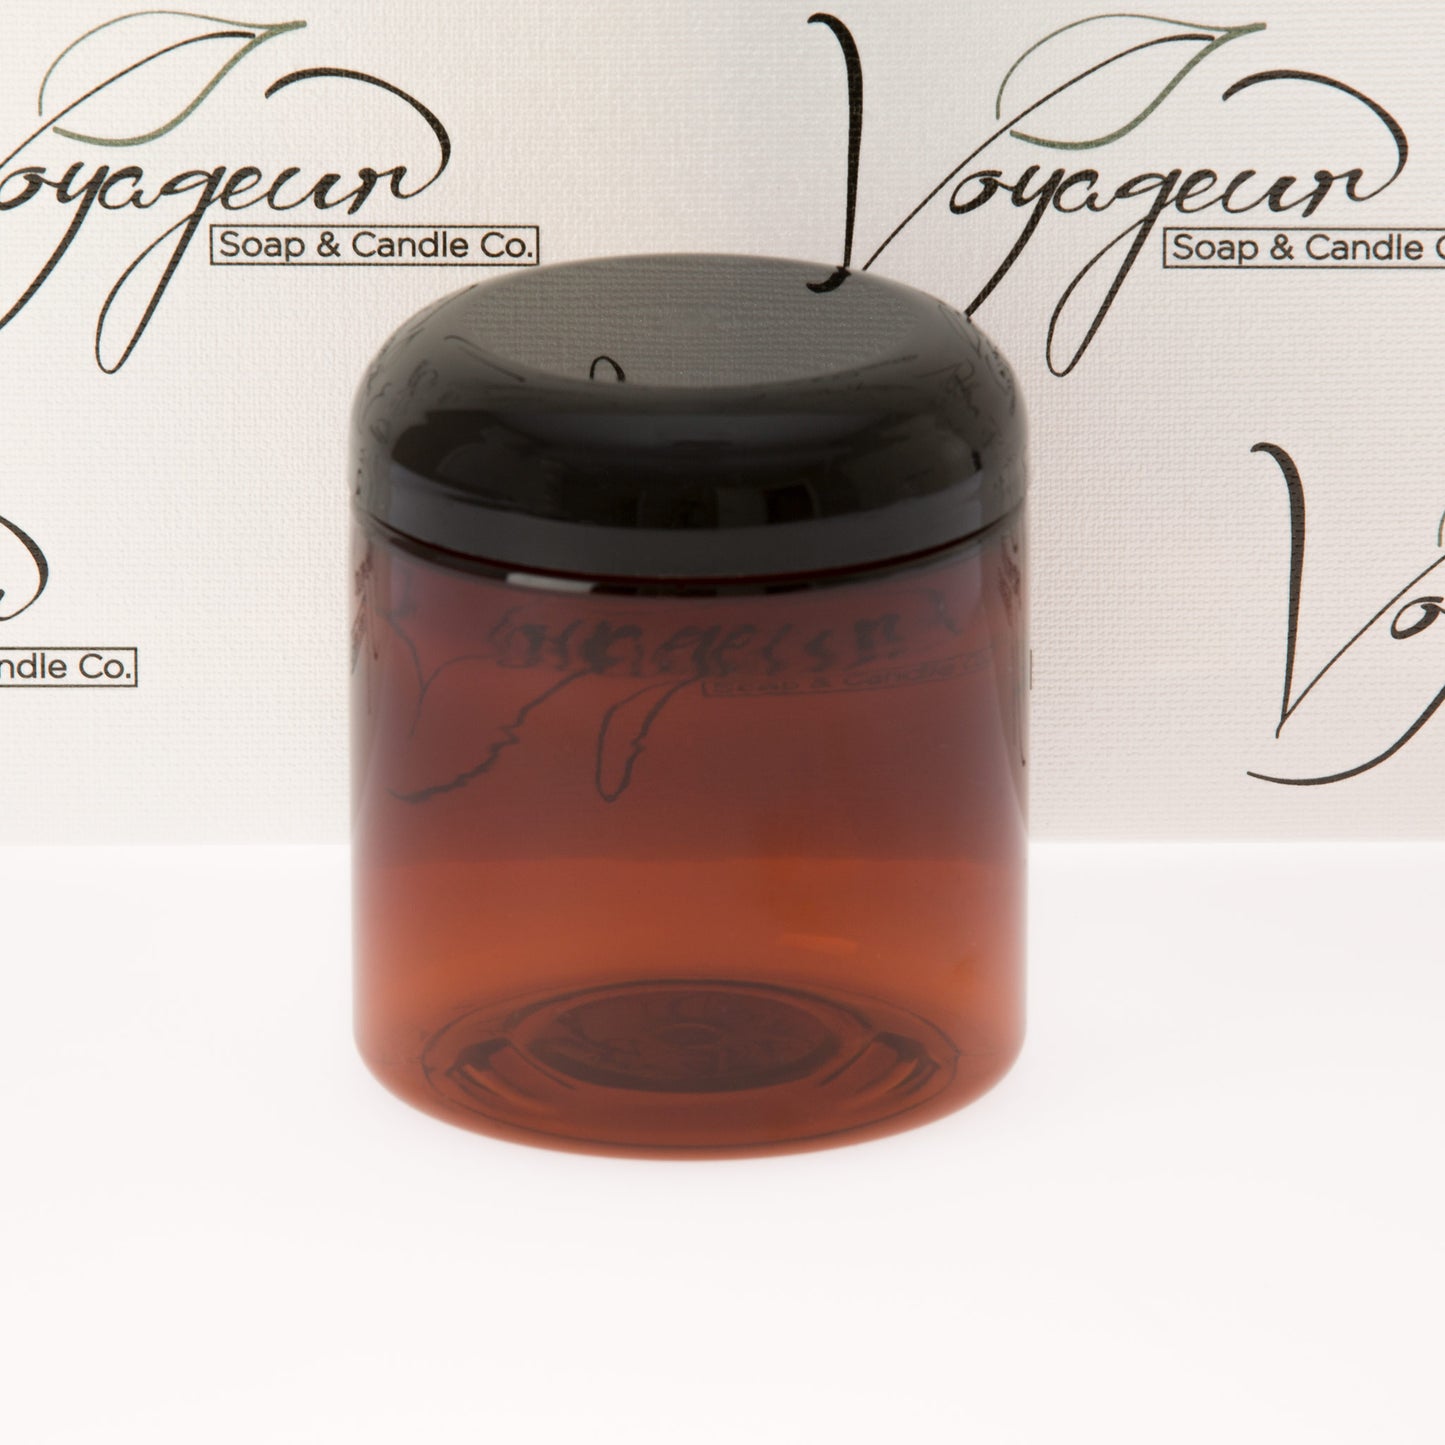 8 oz Amber Straight Sided Jar with Black Dome Cap